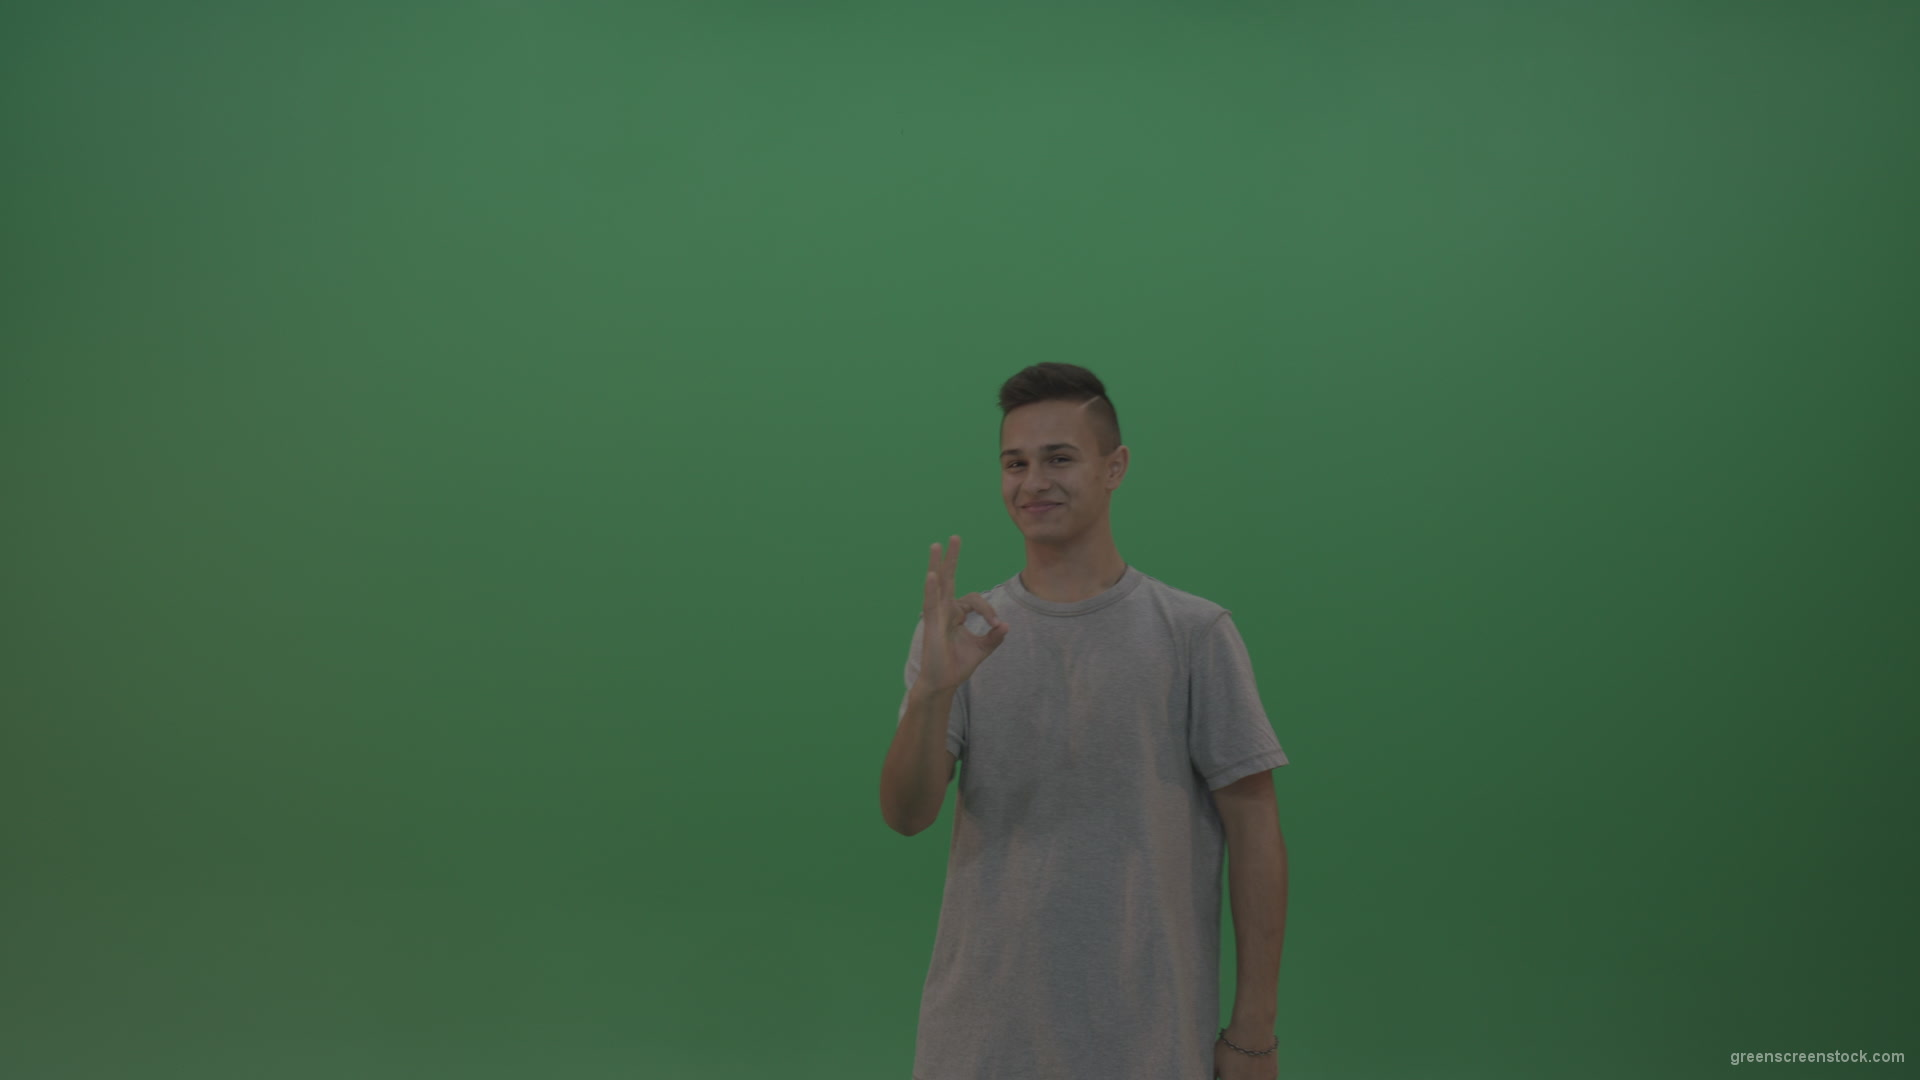 Boy-in-grey-wear-expresses-approval-by-giving-thumbs-up-over-green-screen-background_006 Green Screen Stock